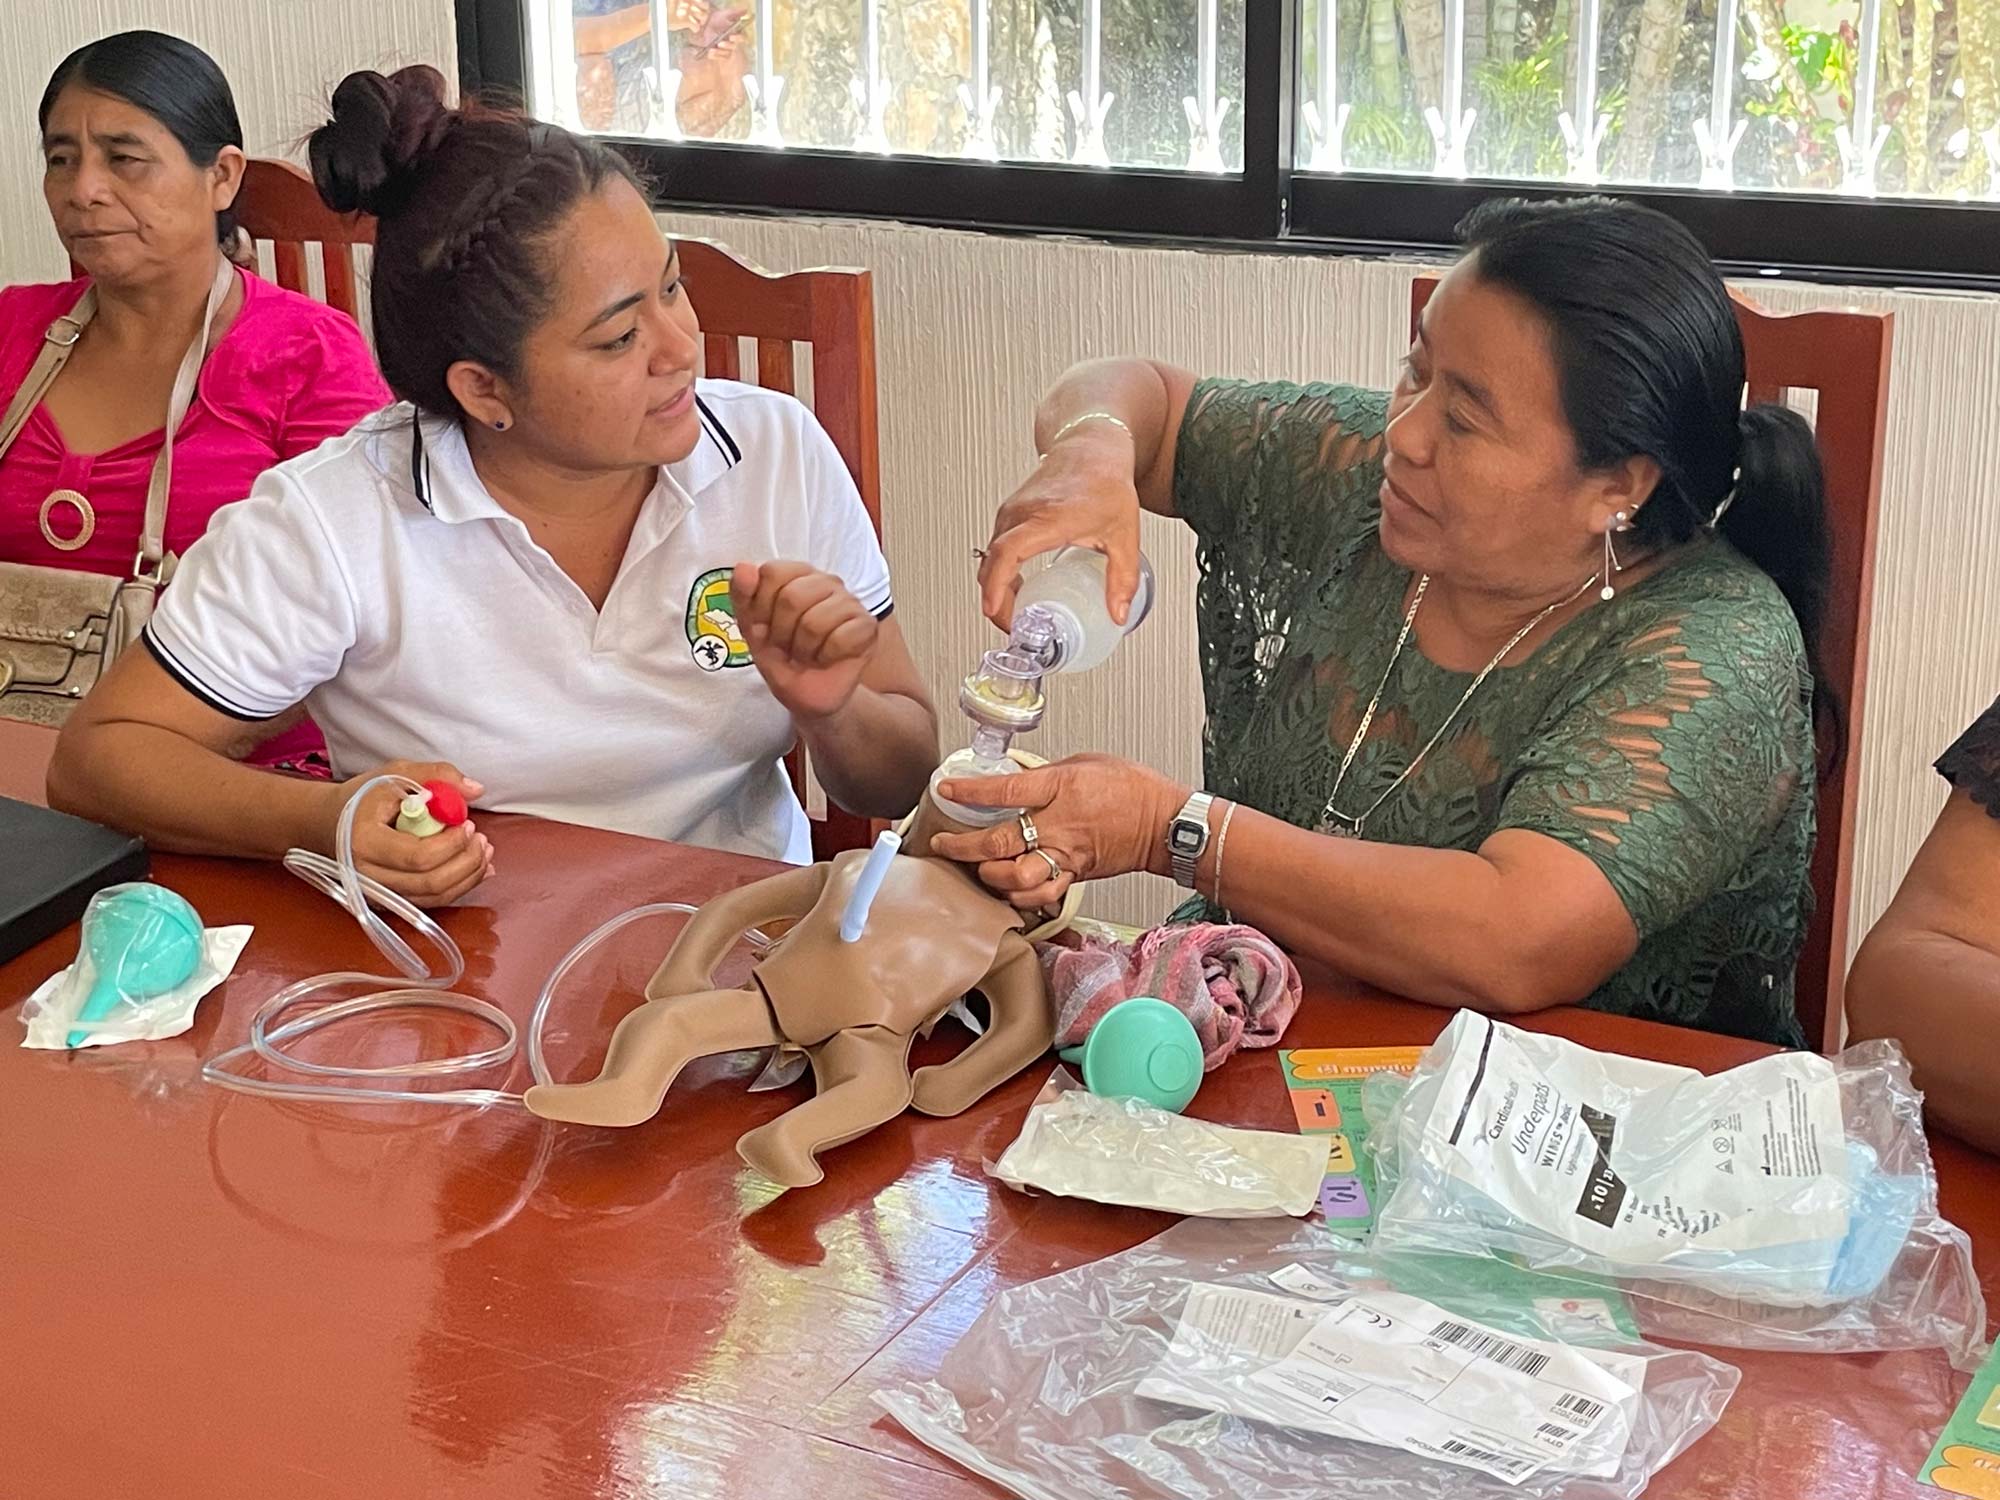 Argelia Rodriquez instructs a midwife in the use of the ambu bag